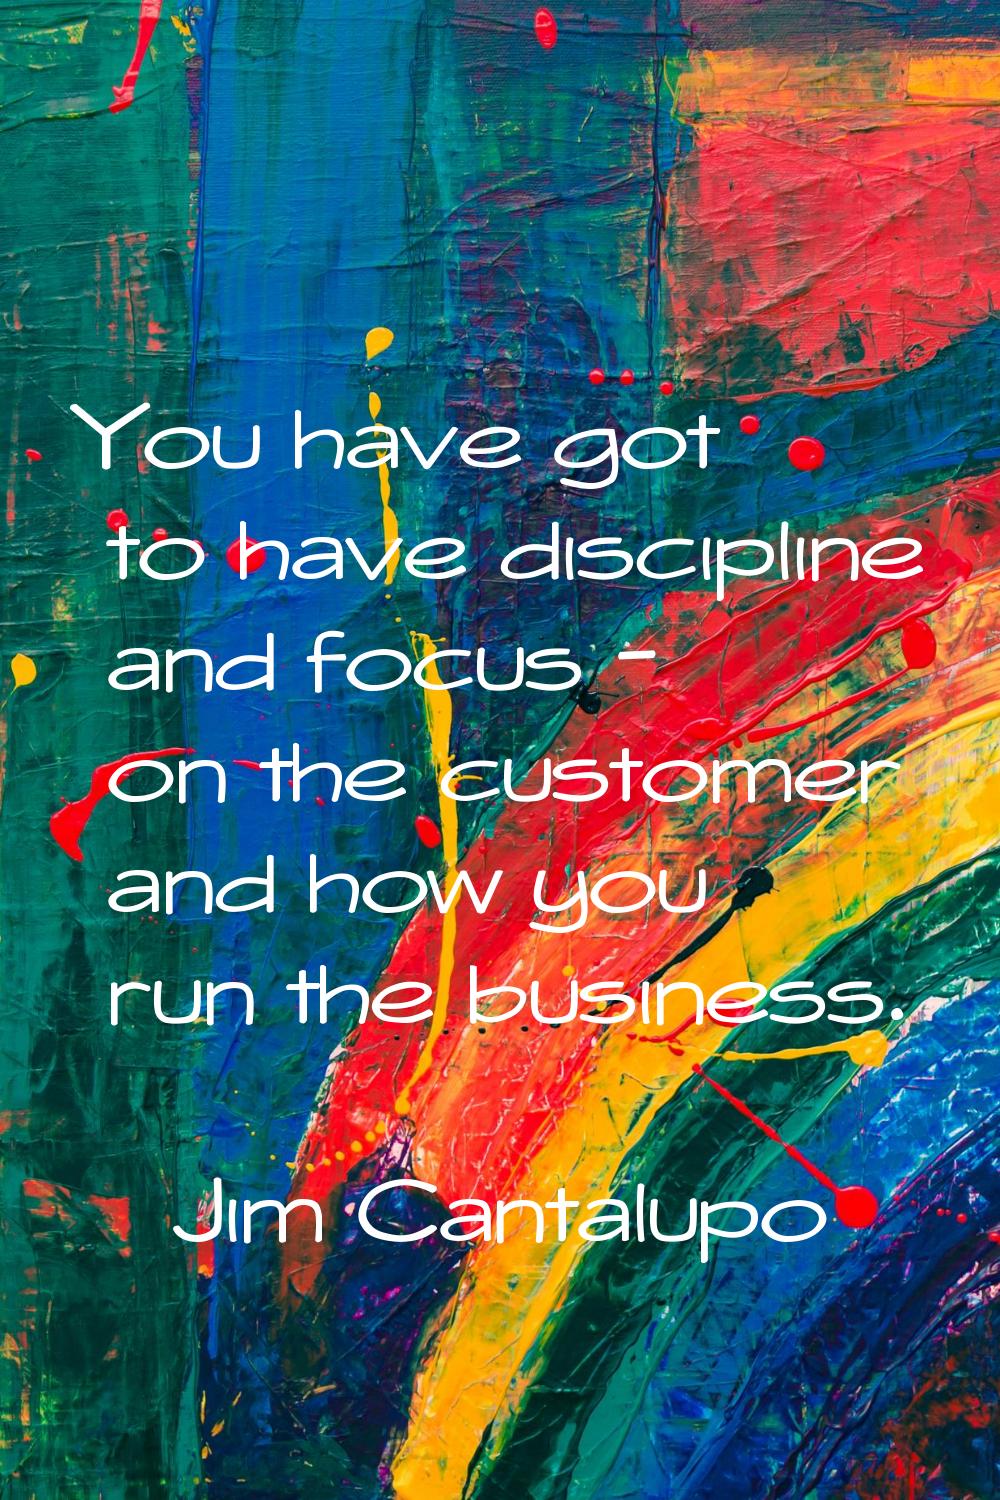 You have got to have discipline and focus - on the customer and how you run the business.